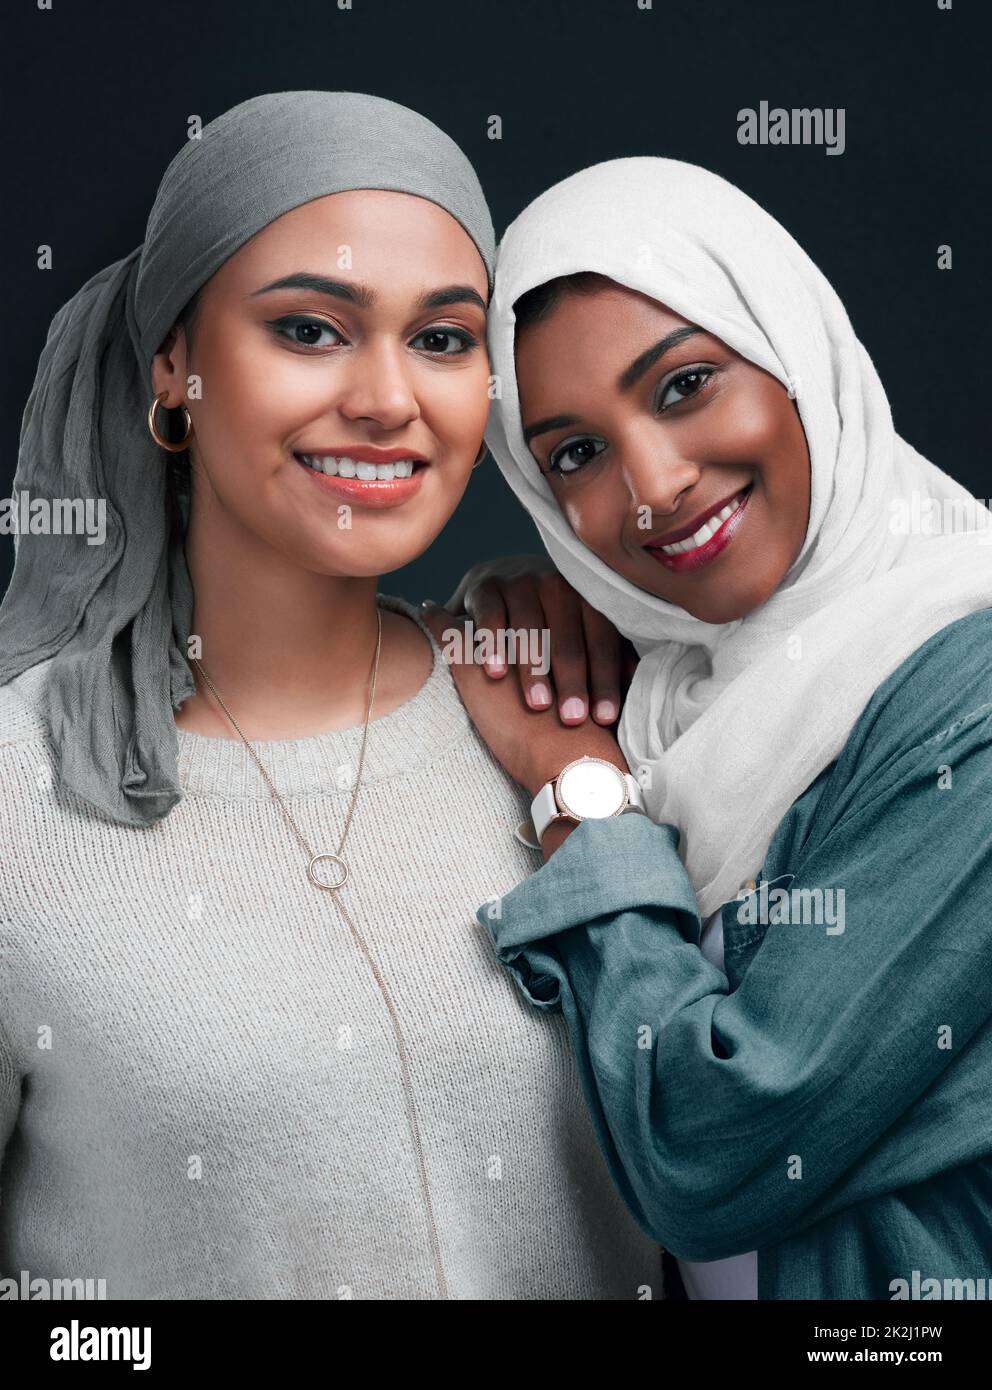 Friends until the end. Cropped shot of two attractive young women wearing hijabs and standing close together against a black background in the studio. Stock Photo